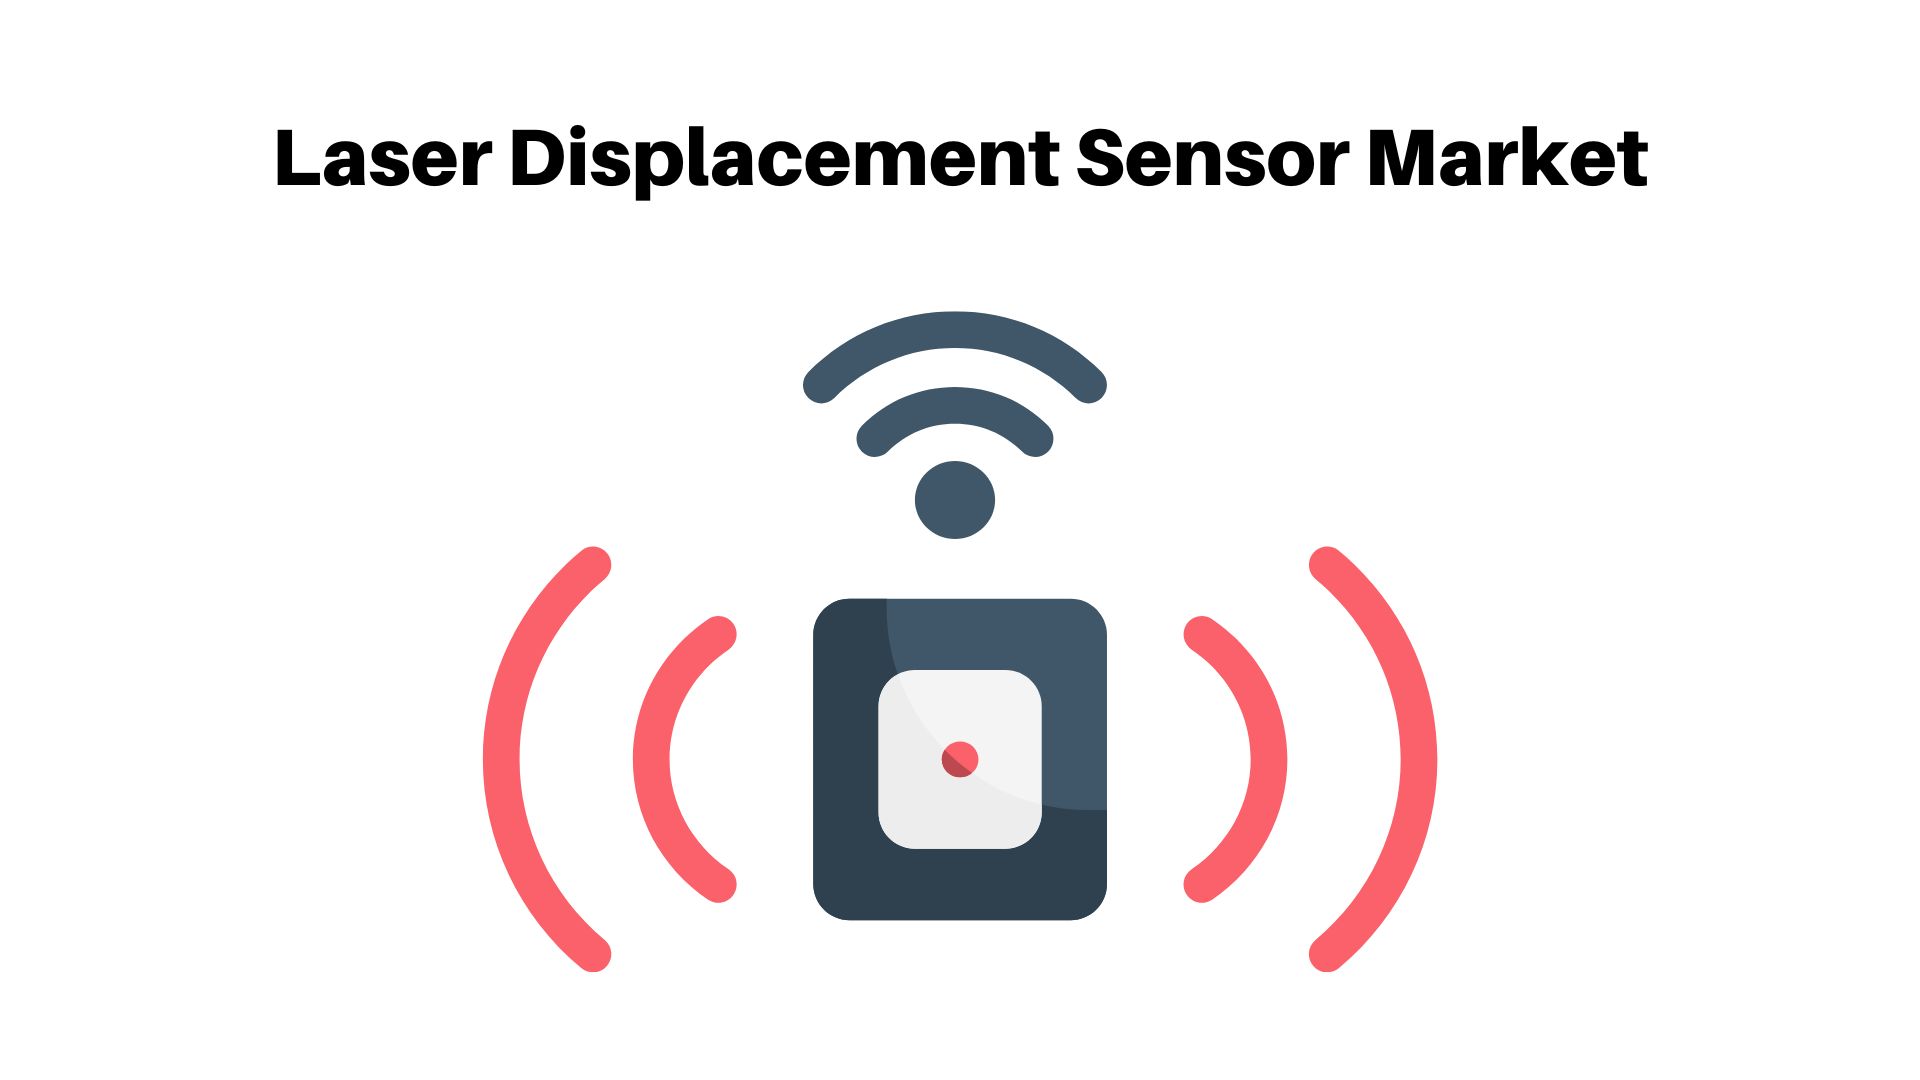 Laser Displacement Sensor Market Is Expected To Rise At A CAGR Of 5.8% | Market.us